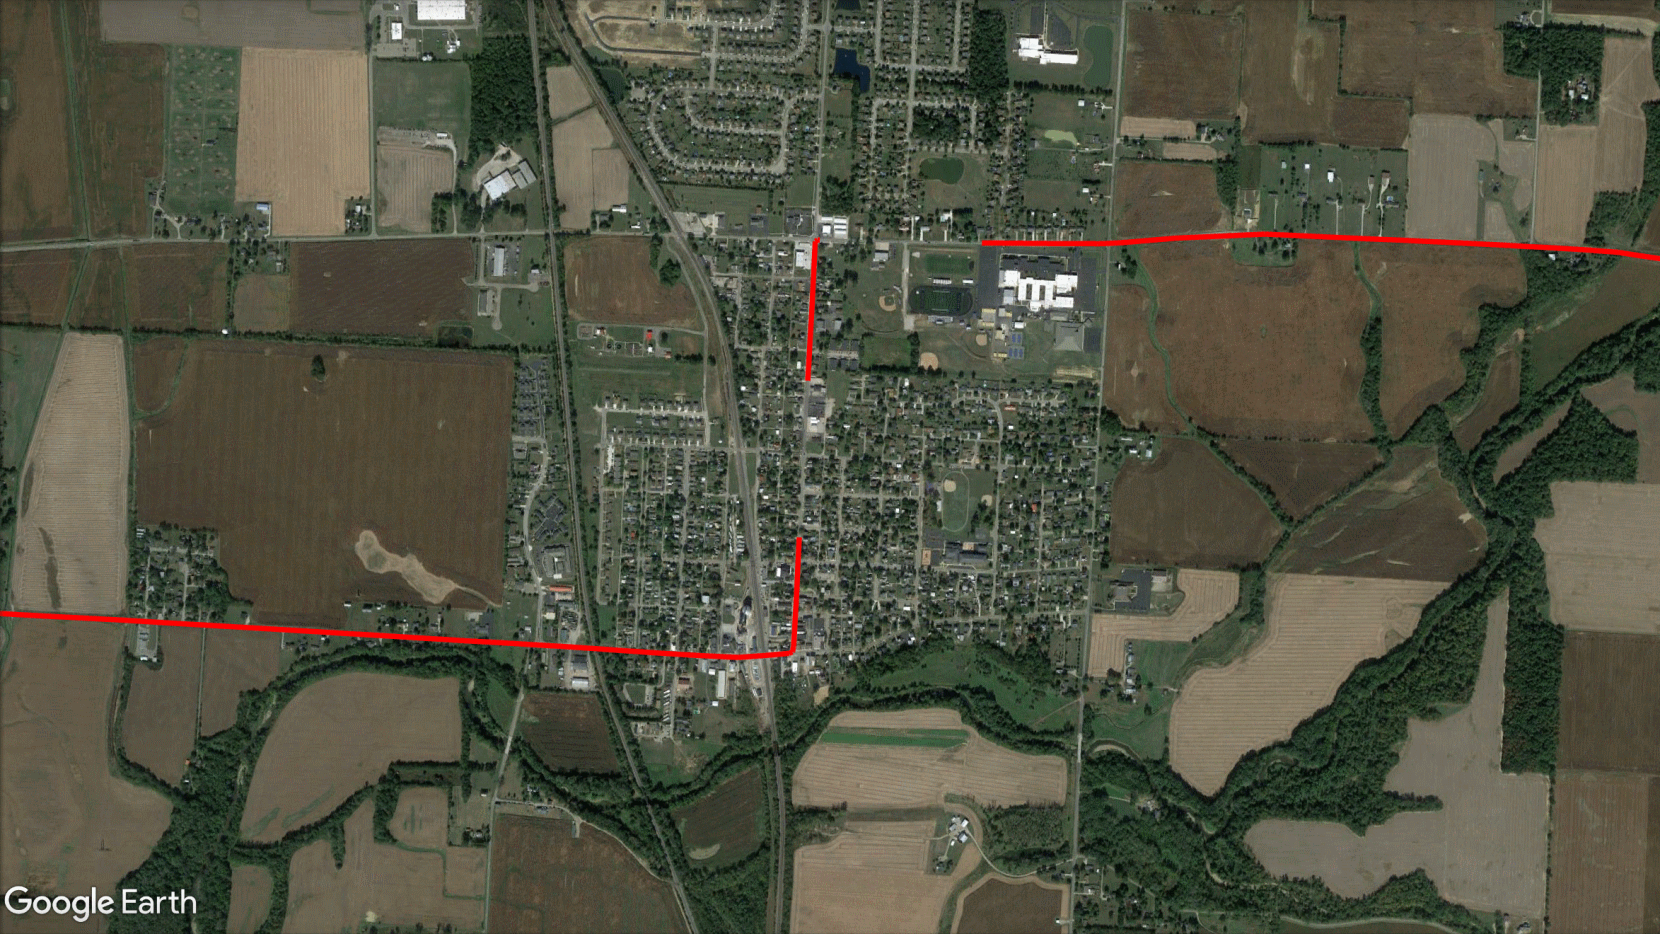 A Google Earth map, showing a driving log line with two visible gaps in it.